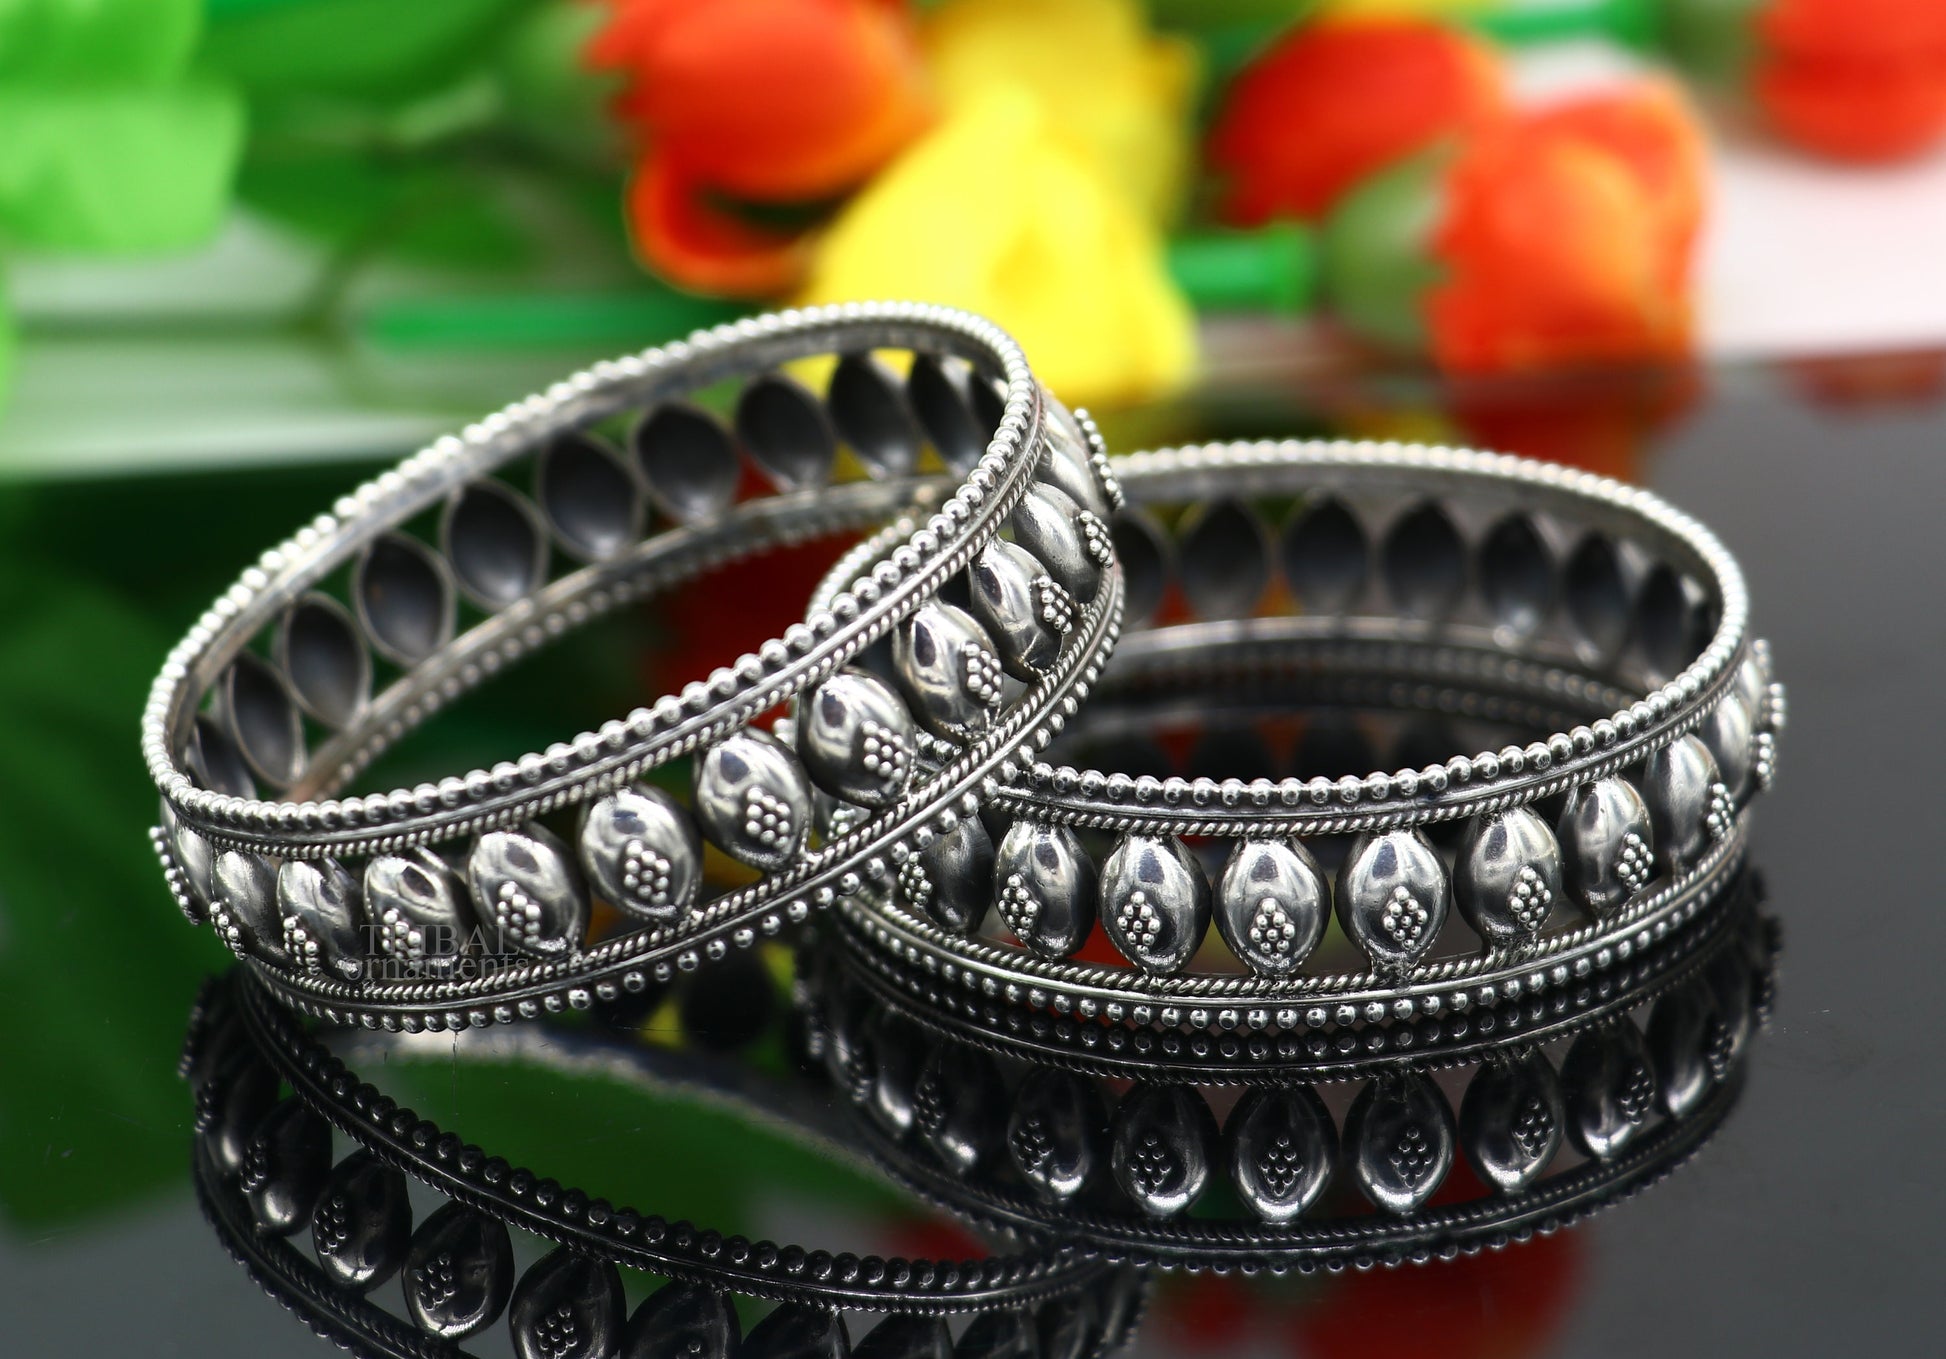 925 sterling silver handmade Gorgeous Vintage floral design bangle bracelet tribal ethnic jewelry best bride gifting jewelry nba313 - TRIBAL ORNAMENTS